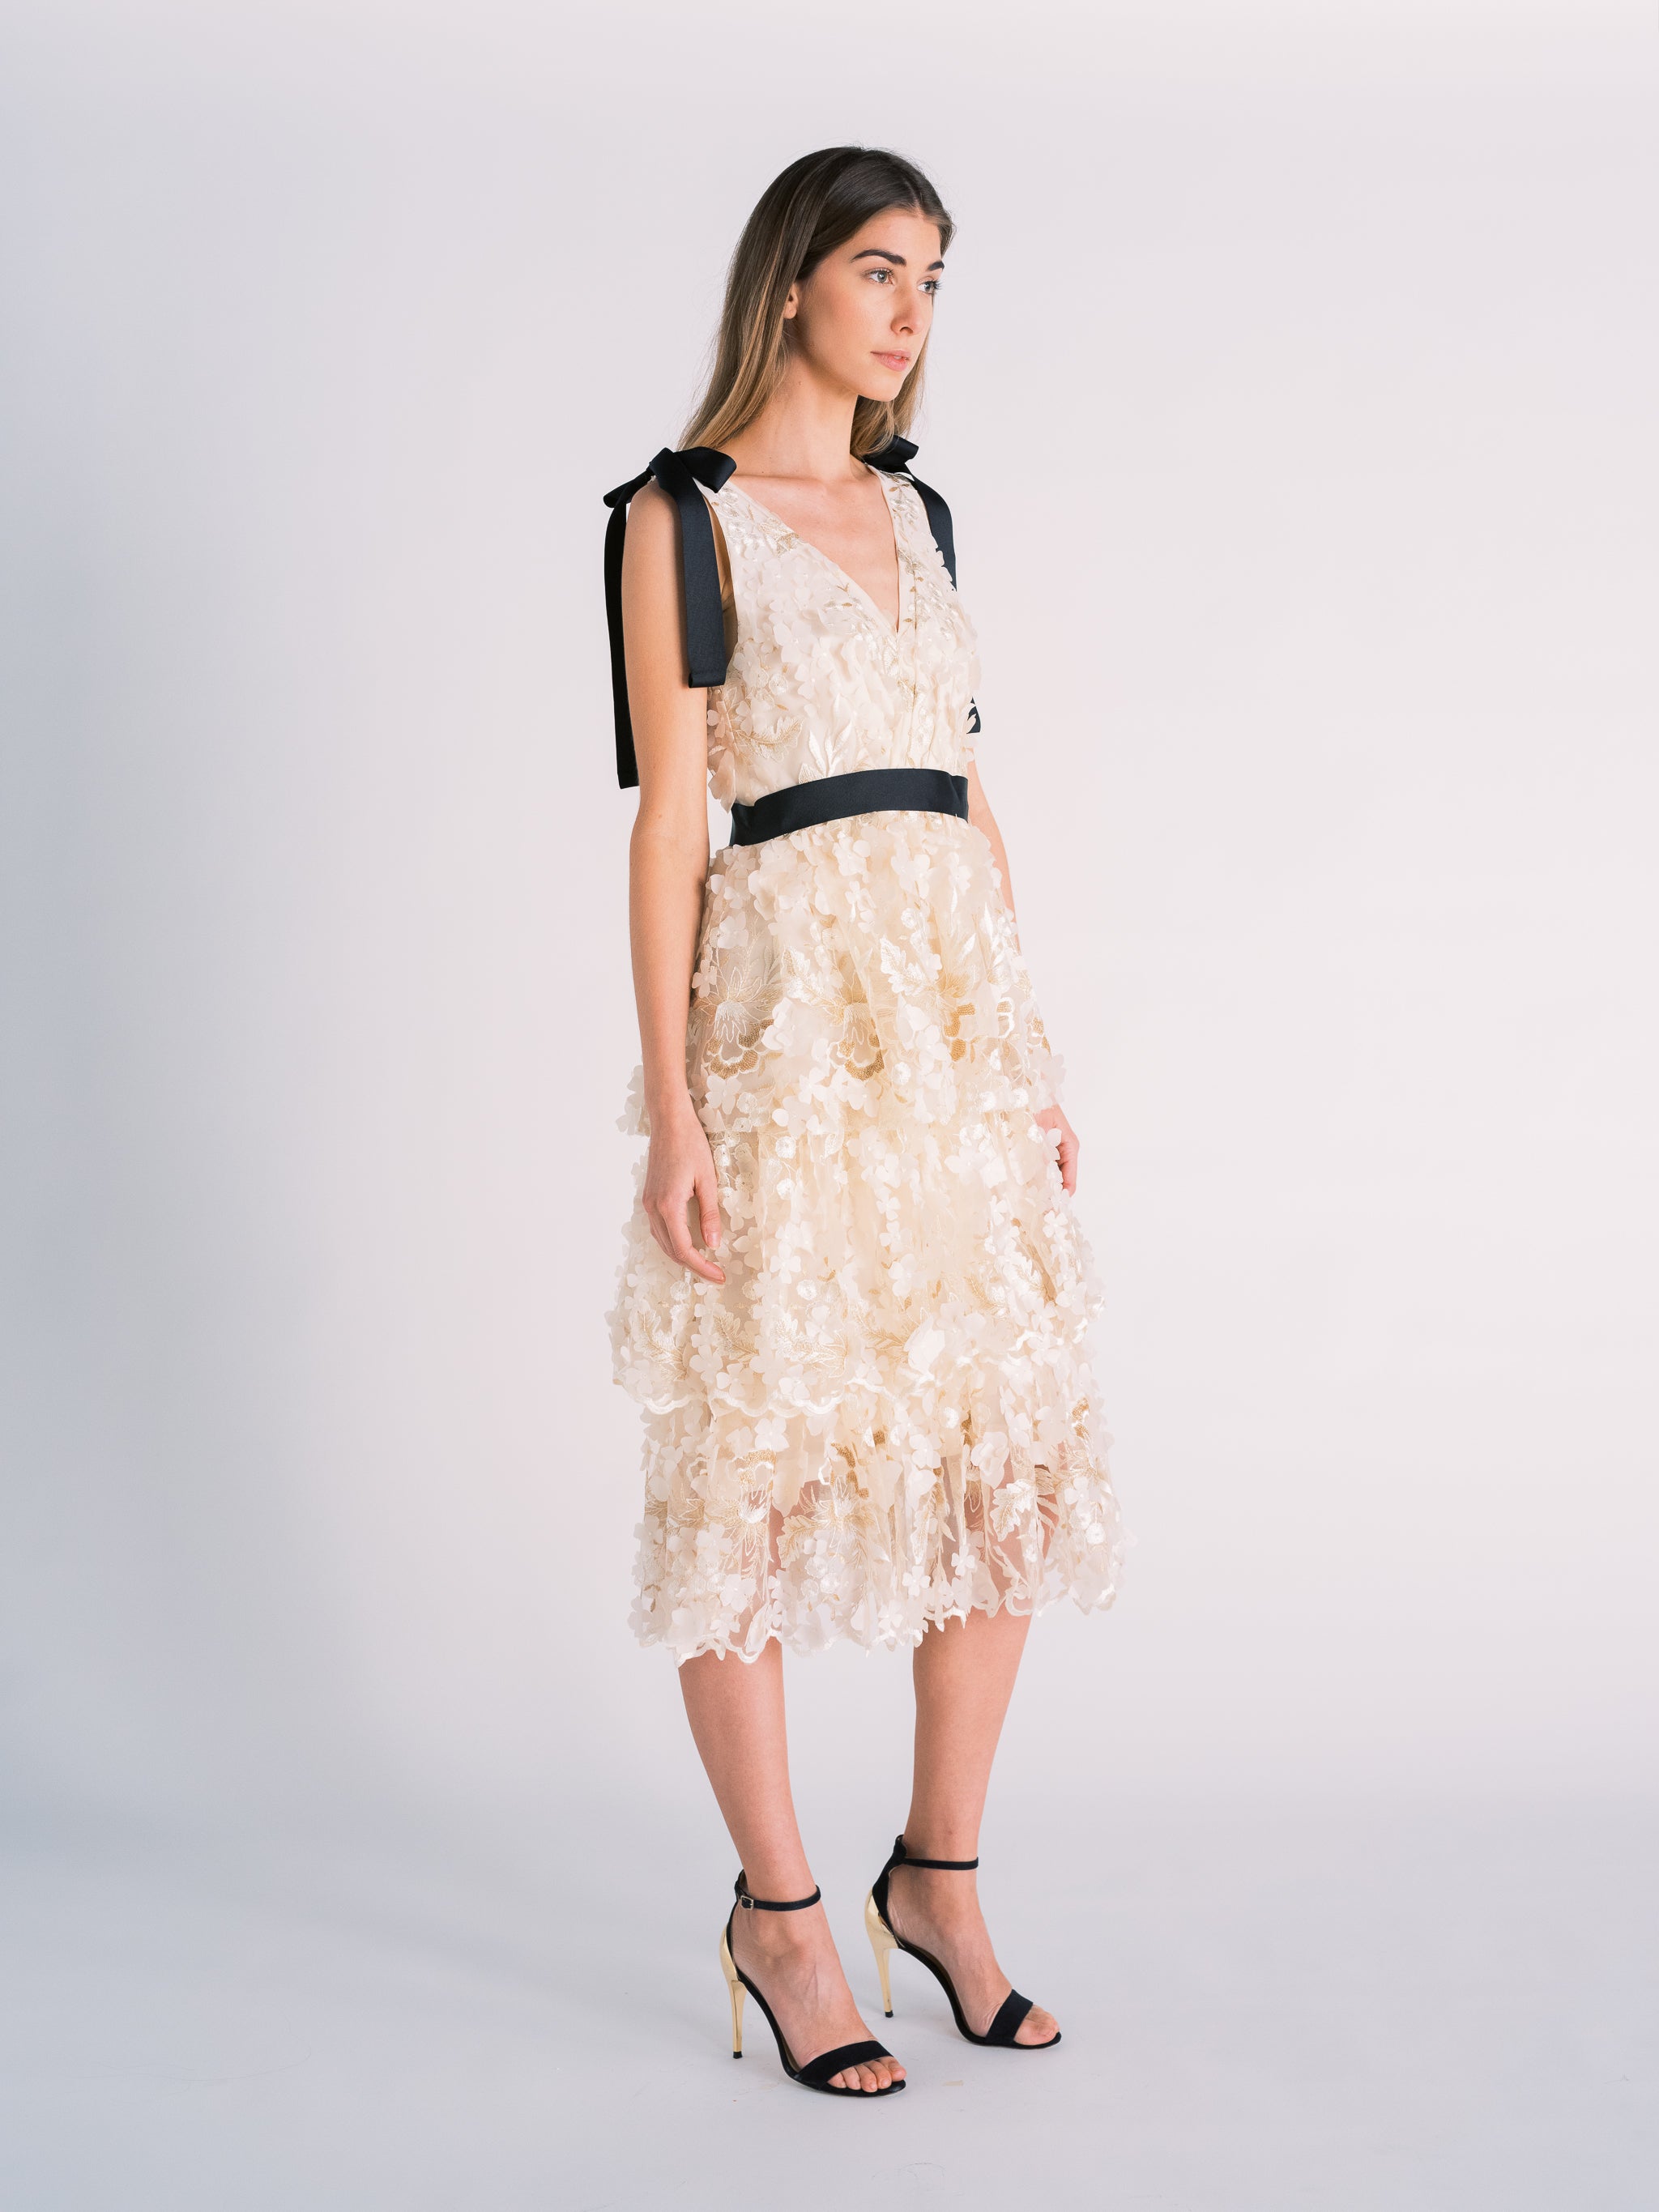 Tiered Floral Cut-out Dress in Off-white